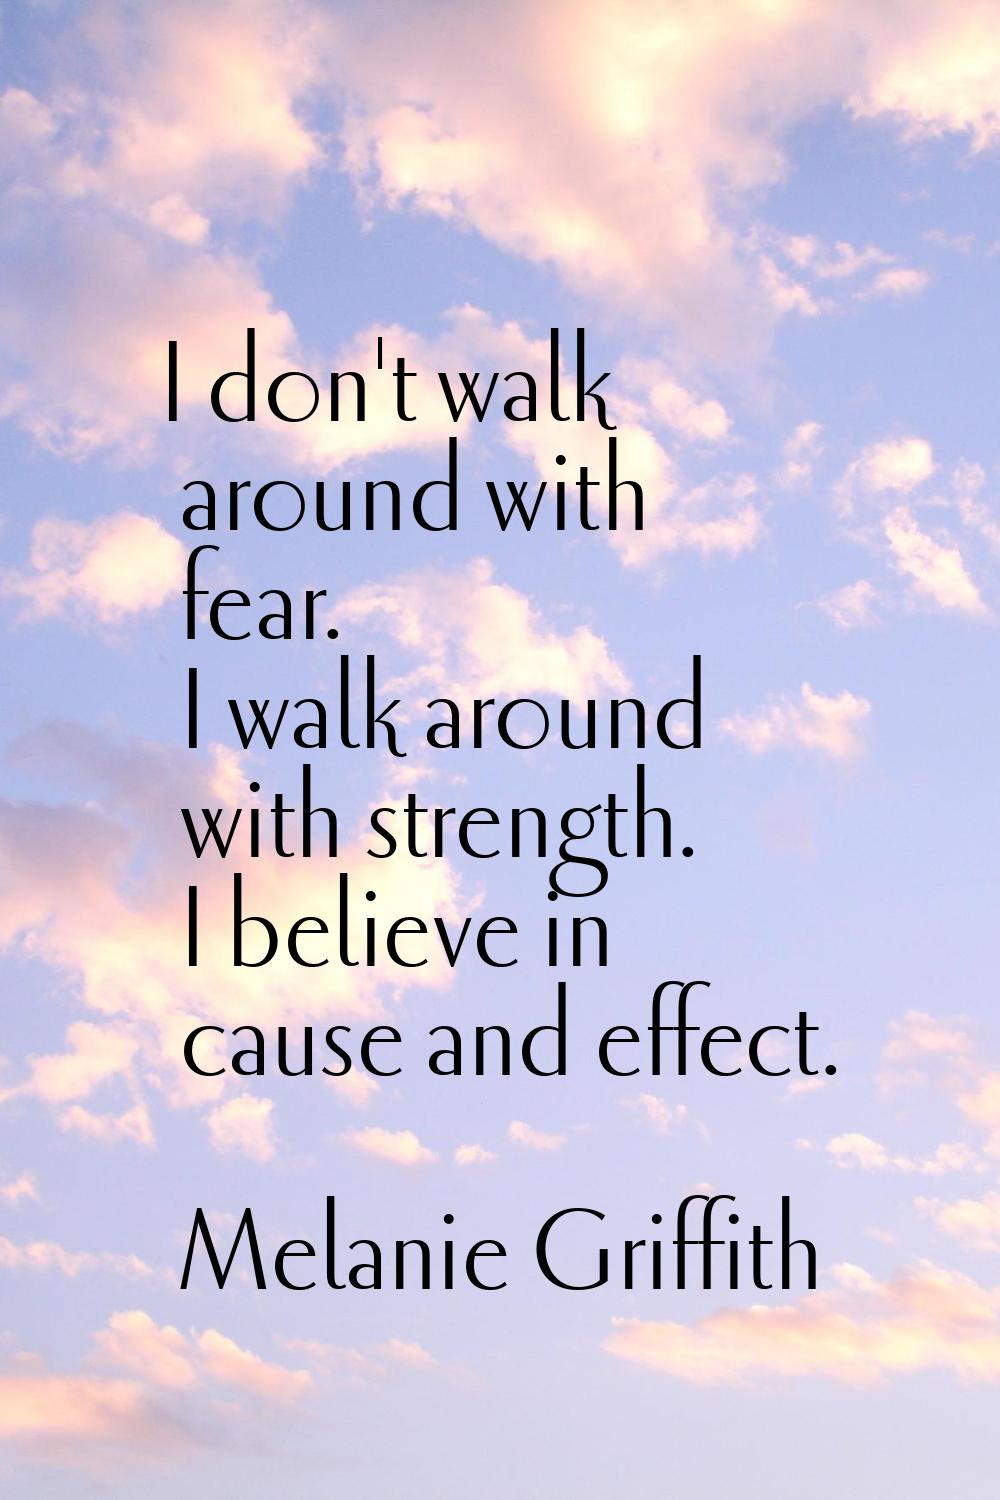 I don't walk around with fear. I walk around with strength. I believe in cause and effect.